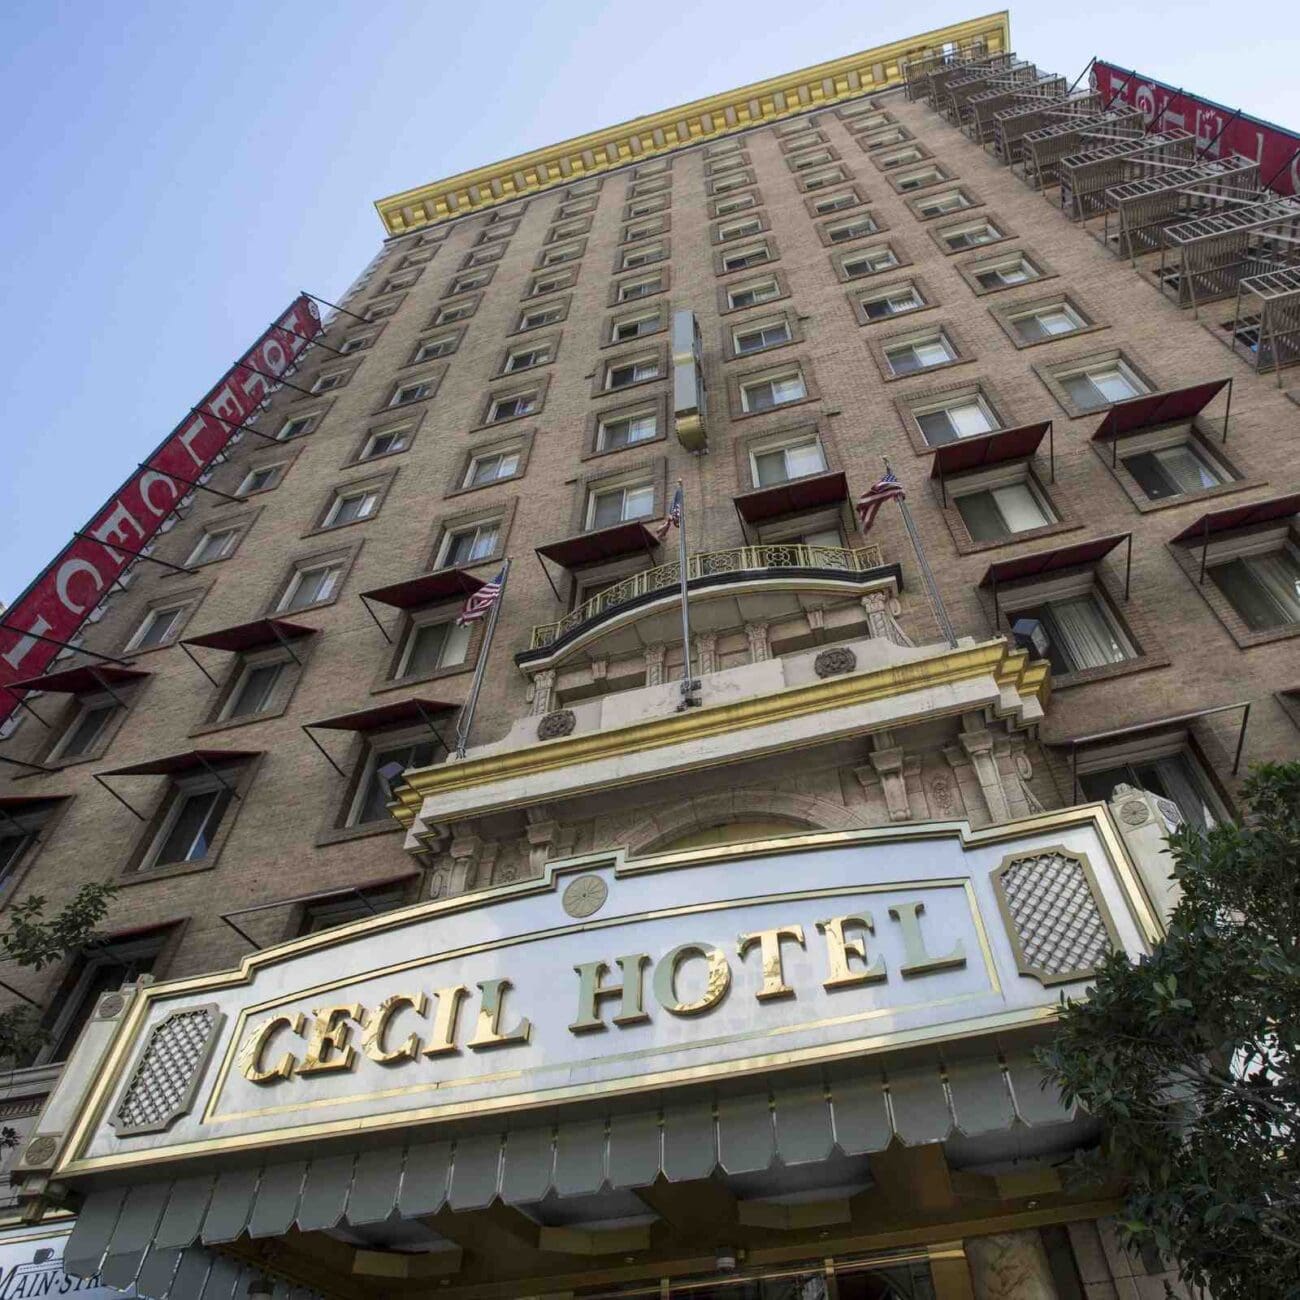 Dare to stay at the Hotel Cecil in Los Angeles? Binge-watch reality as chilling guest reviews evoke spirits scarier than any TV ghost. Will you check in or ghost them?